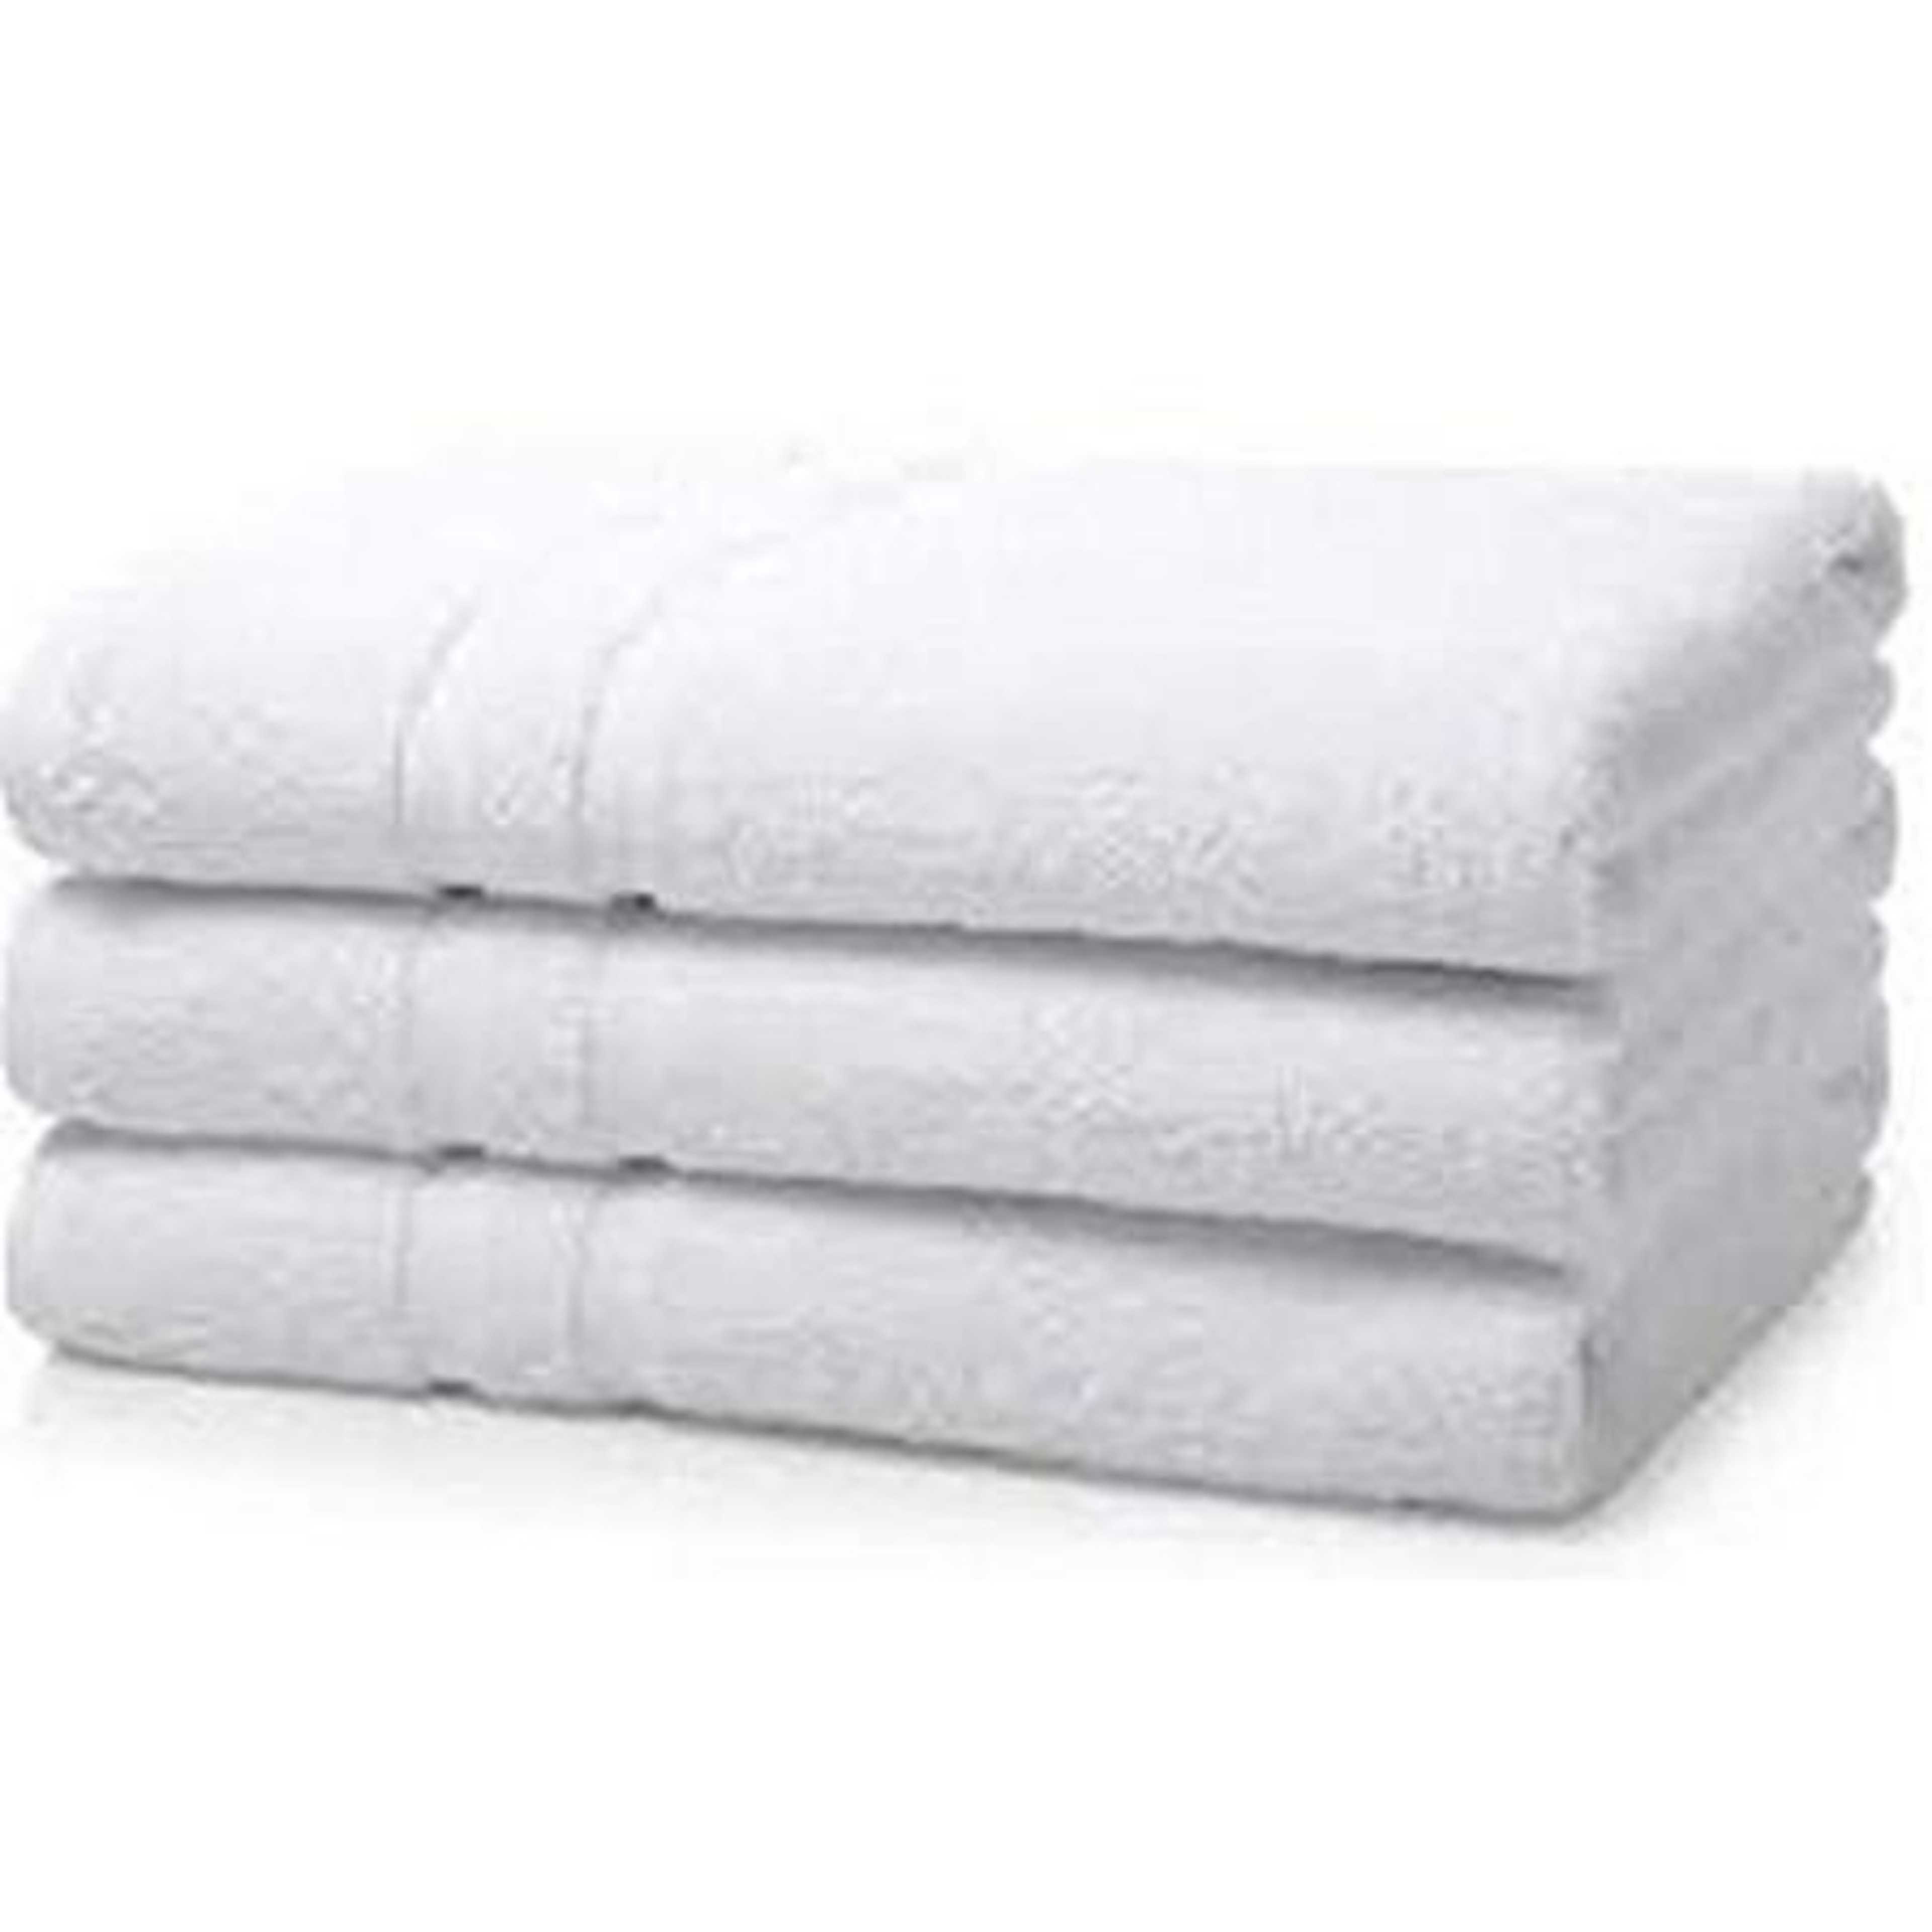 Export Quality Luxury Cotton Bath Towel Set (Pack of 3) , White, Highly Absorbent, Machine Washable Sport and Workout Towels